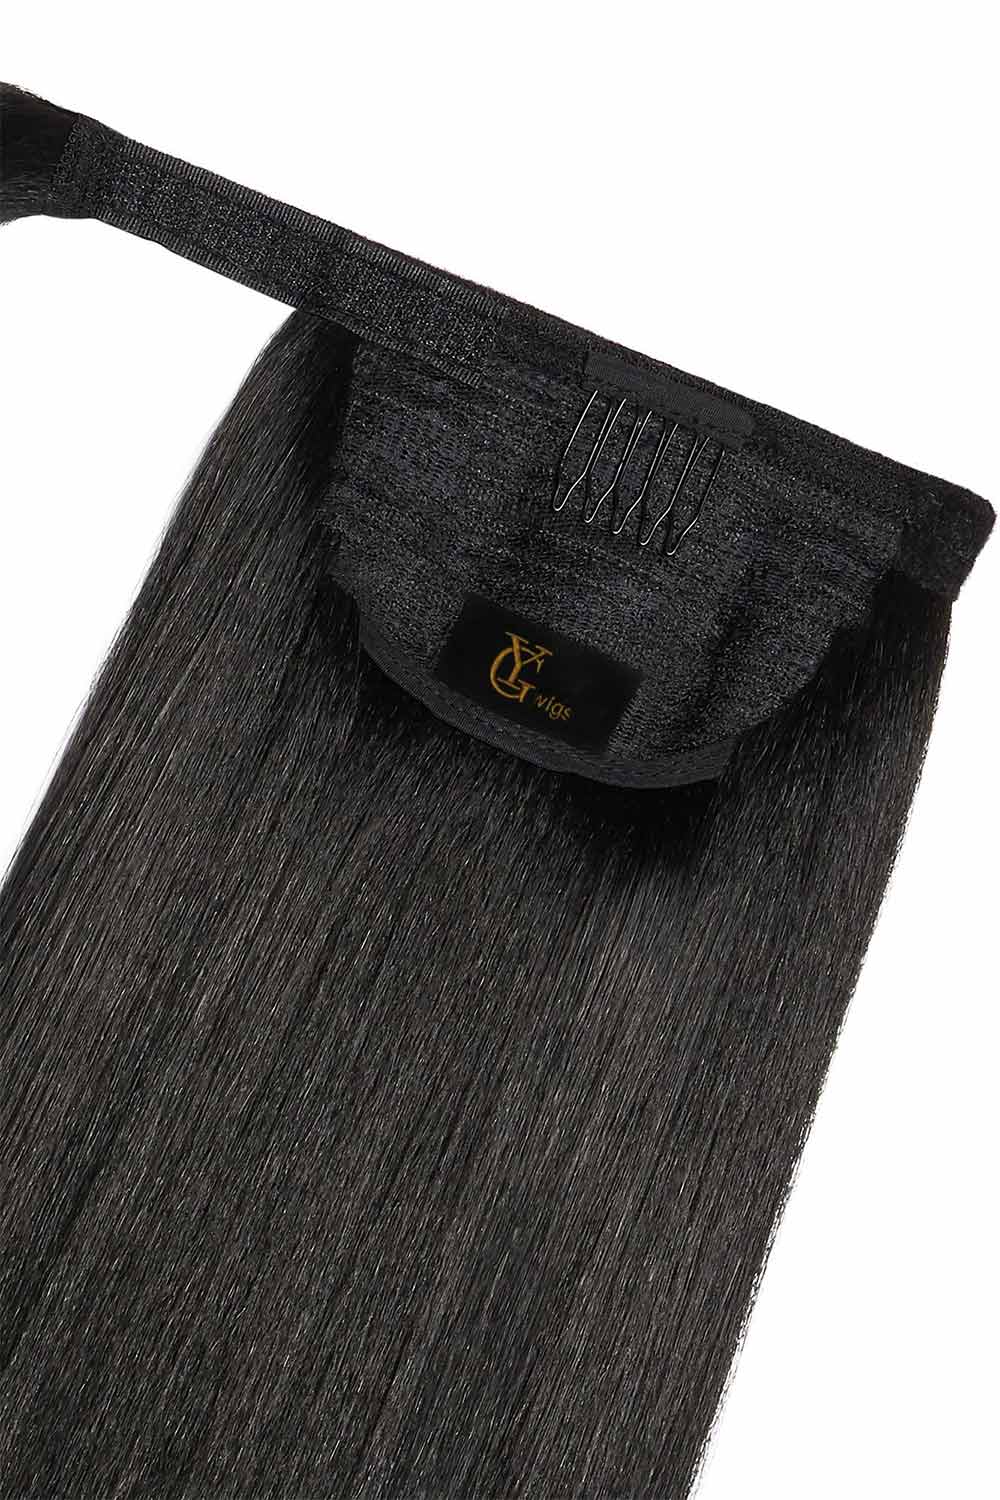 Straight Natural Color Ponytails Wrap Around Extensions 120-150g